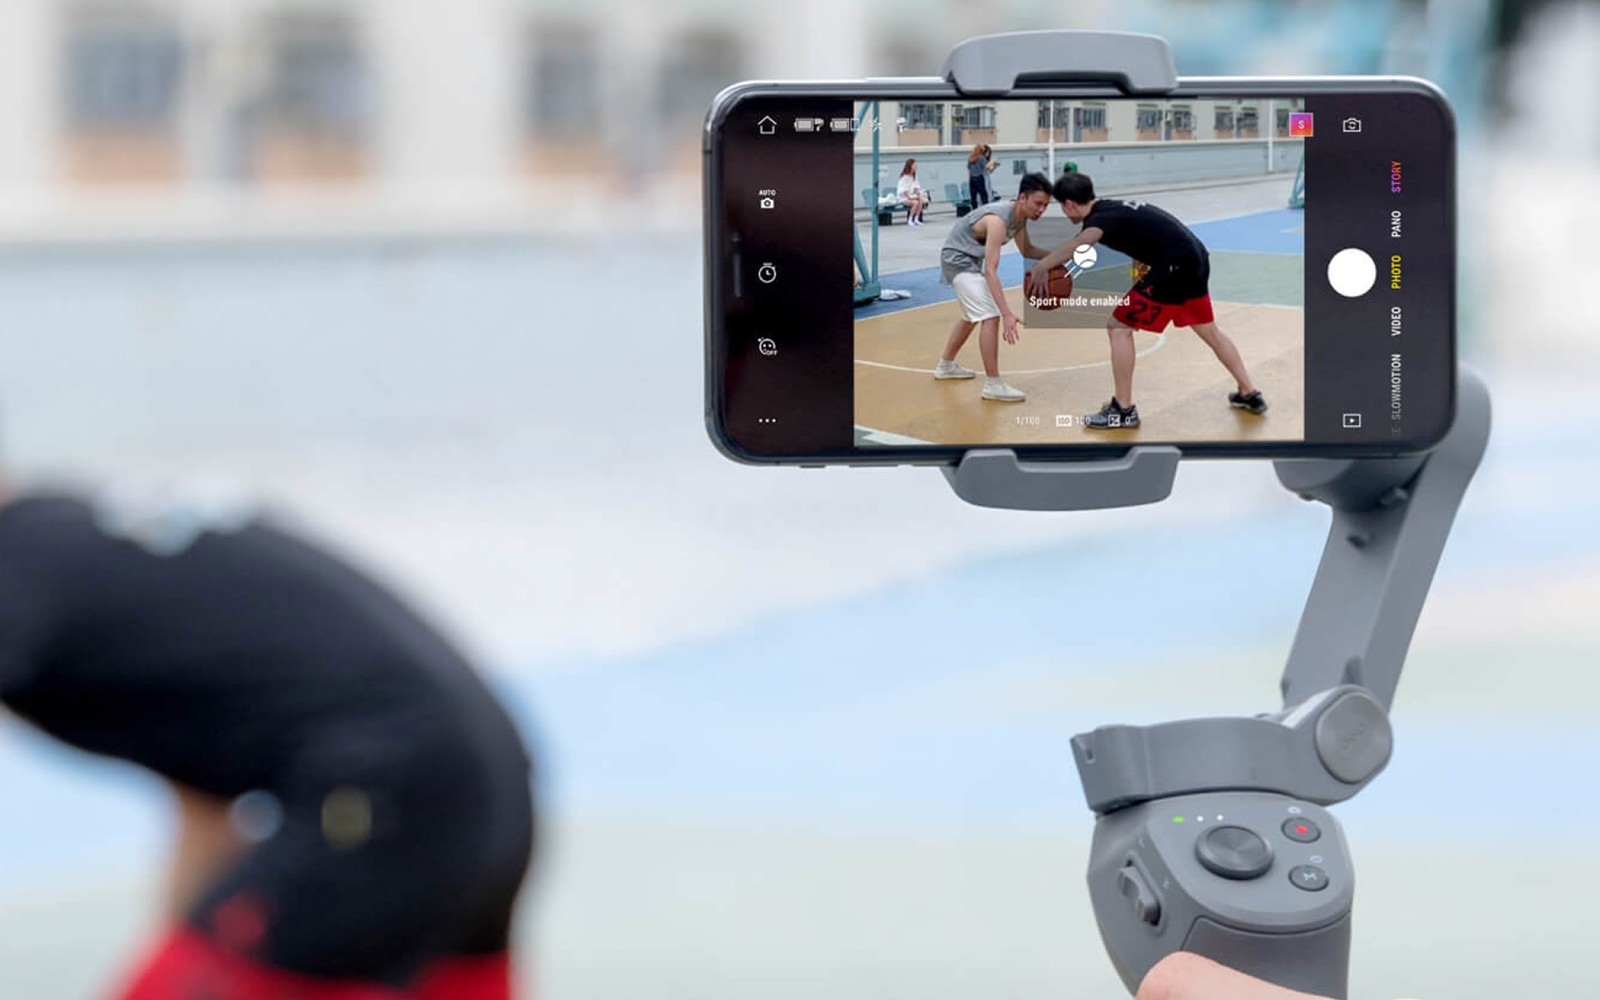 DJI’s Osmo Mobile 3 gimbal kit with tripod drops to $89 for Black Friday | DeviceDaily.com